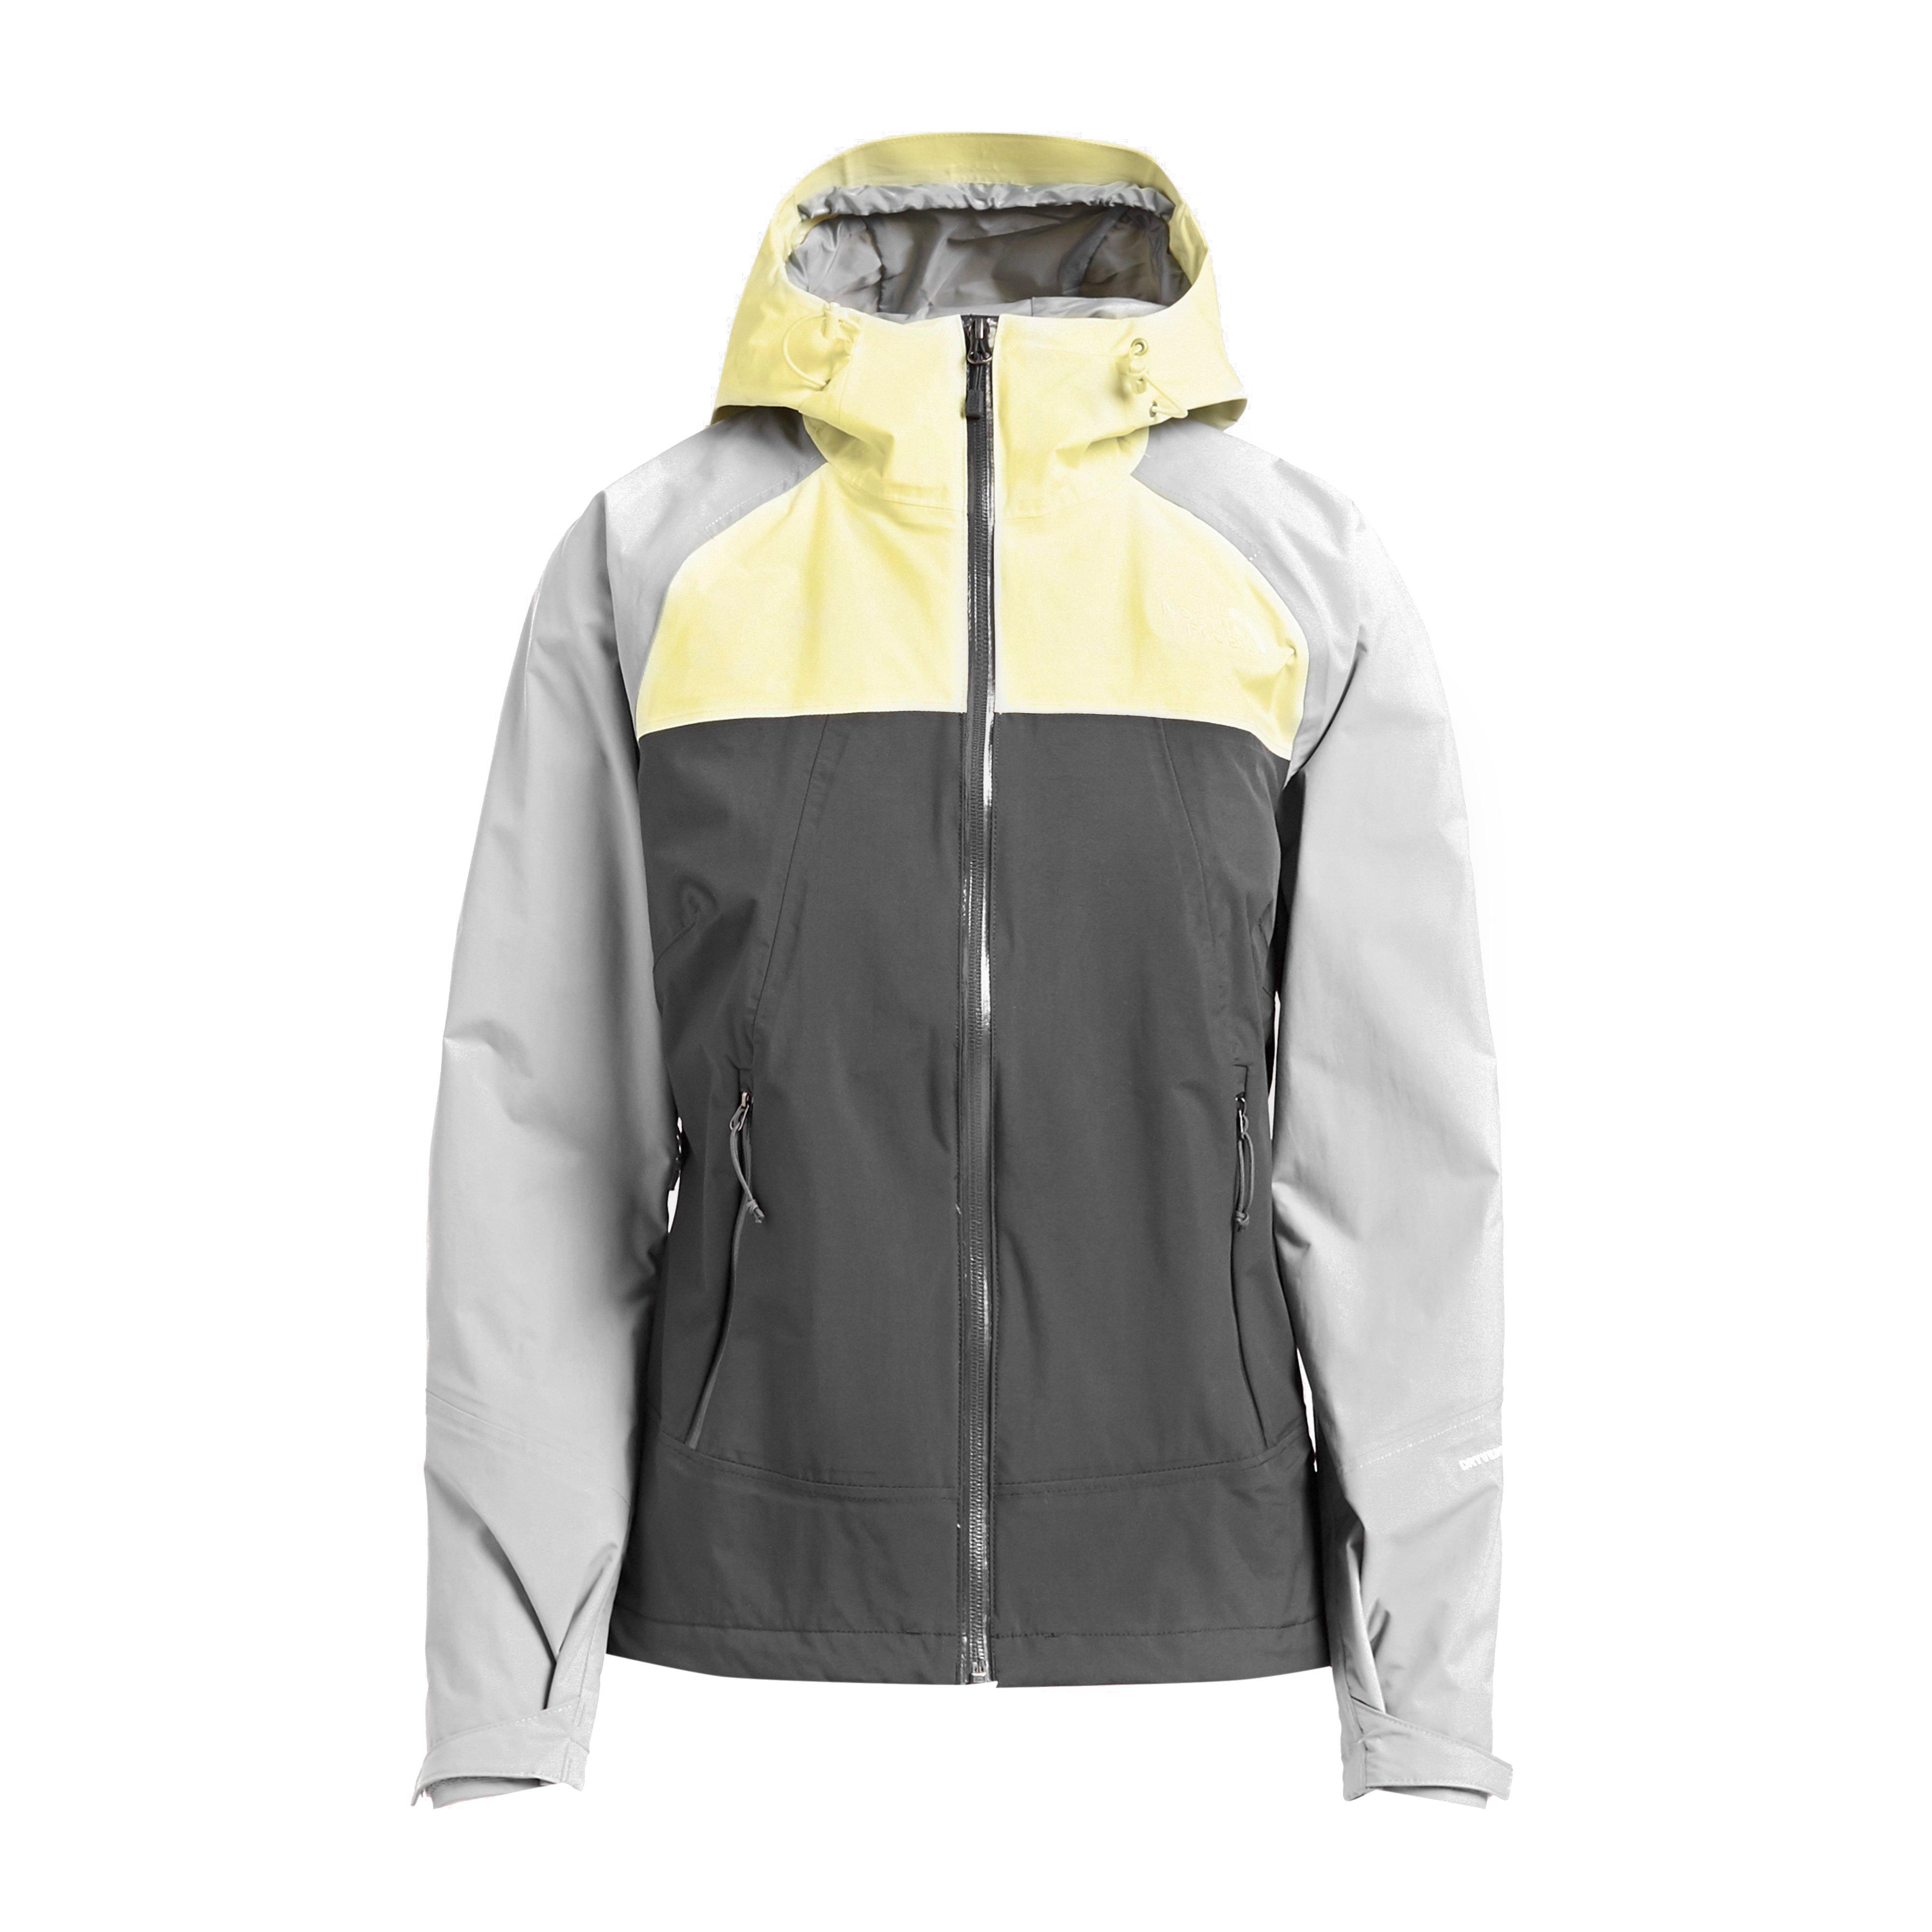 the north face women's stratos jacket